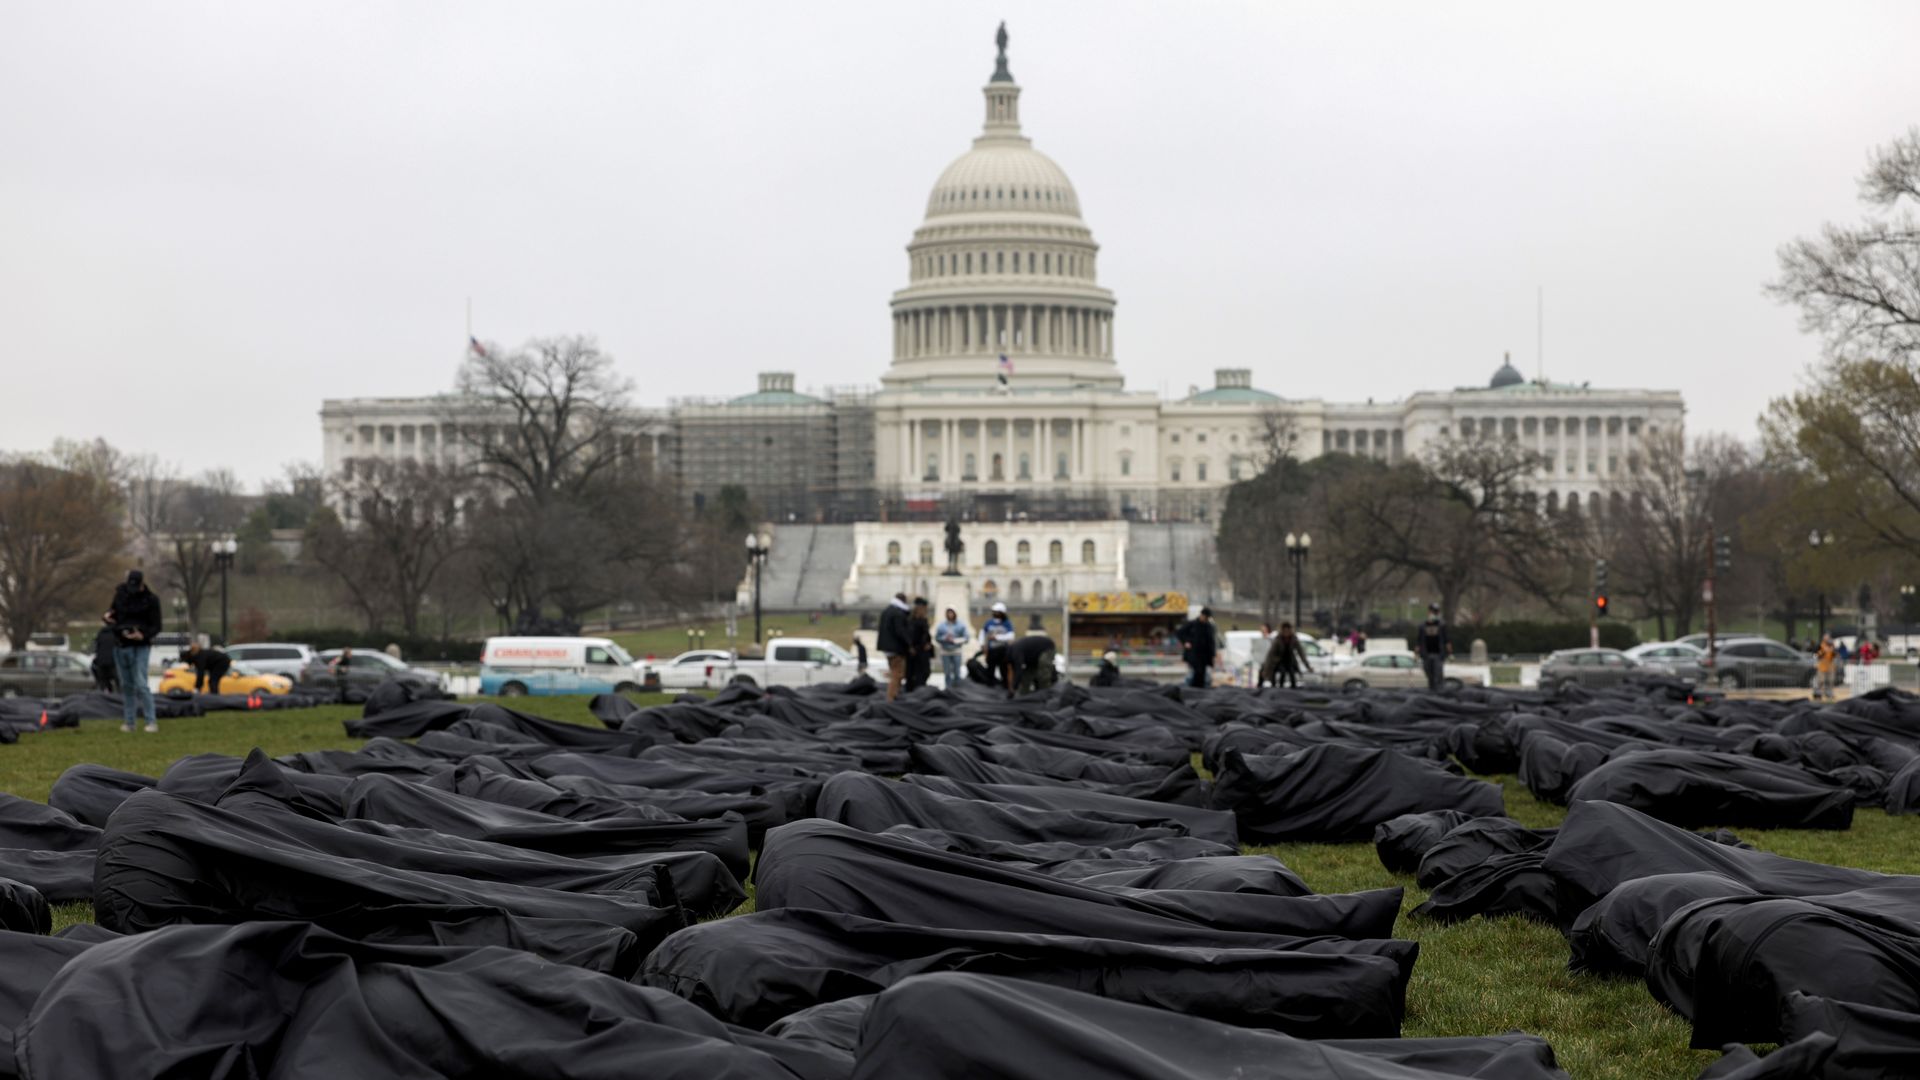 Symbolic black body bags are seen spread on the National Mall and against a backdrop of the Capitol.